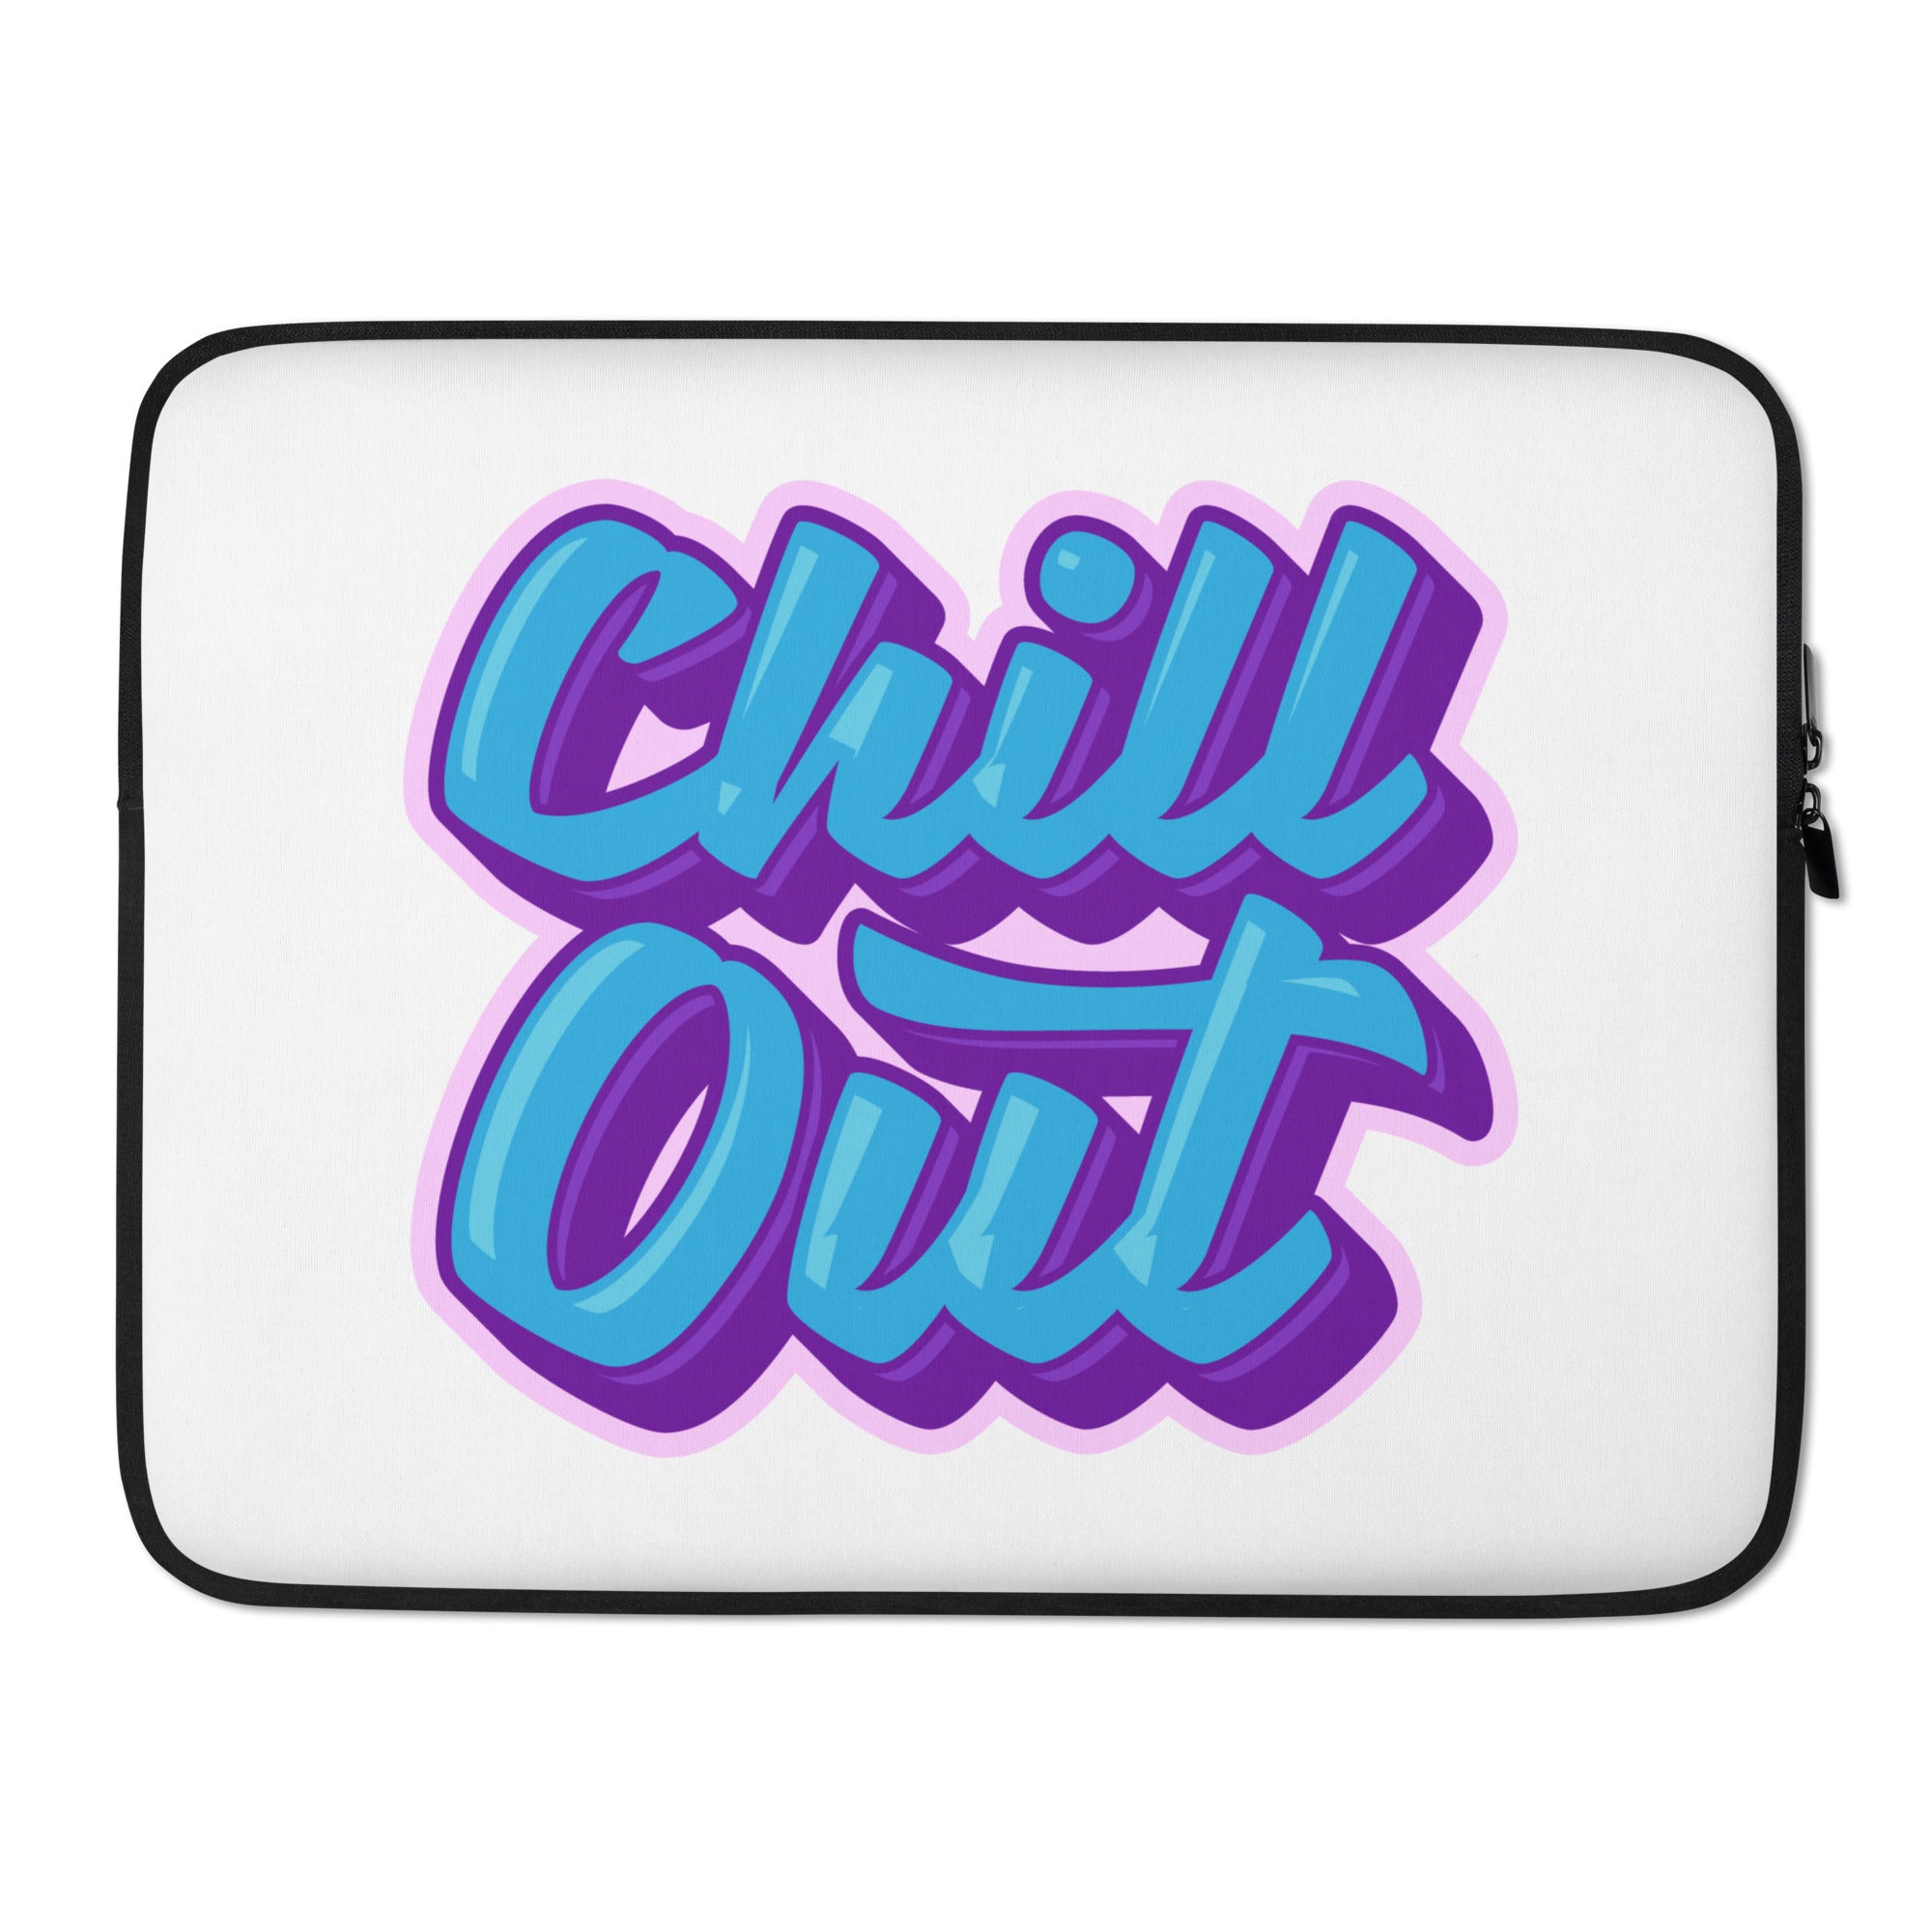 Chill Out - Laptop Sleeve